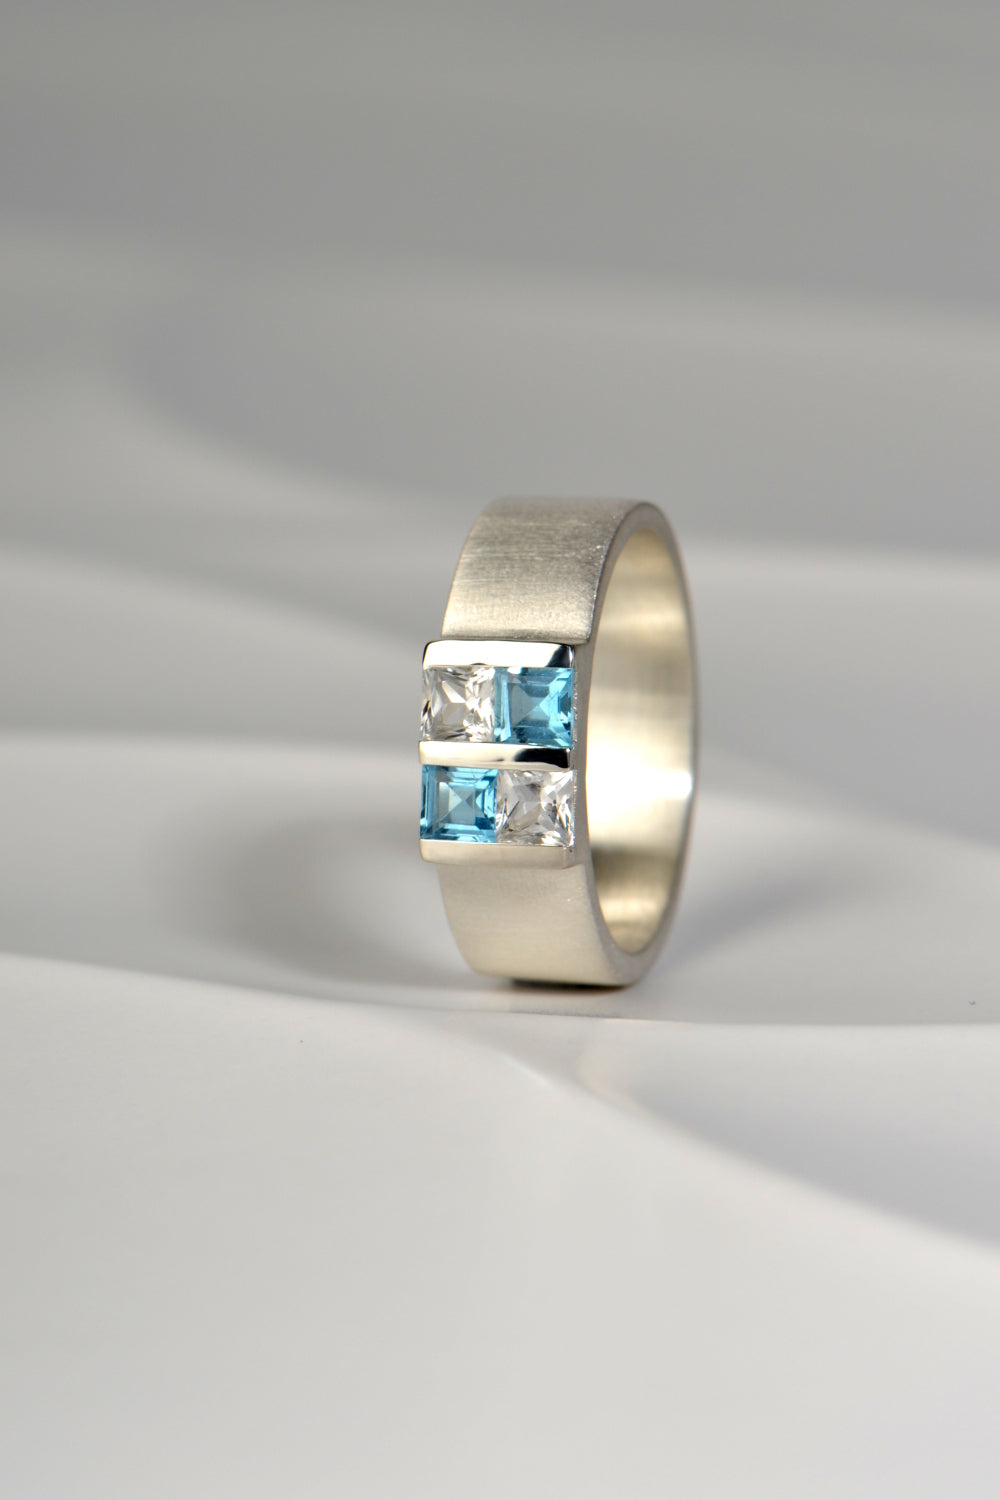 Battenberg ring with blue and white topazes